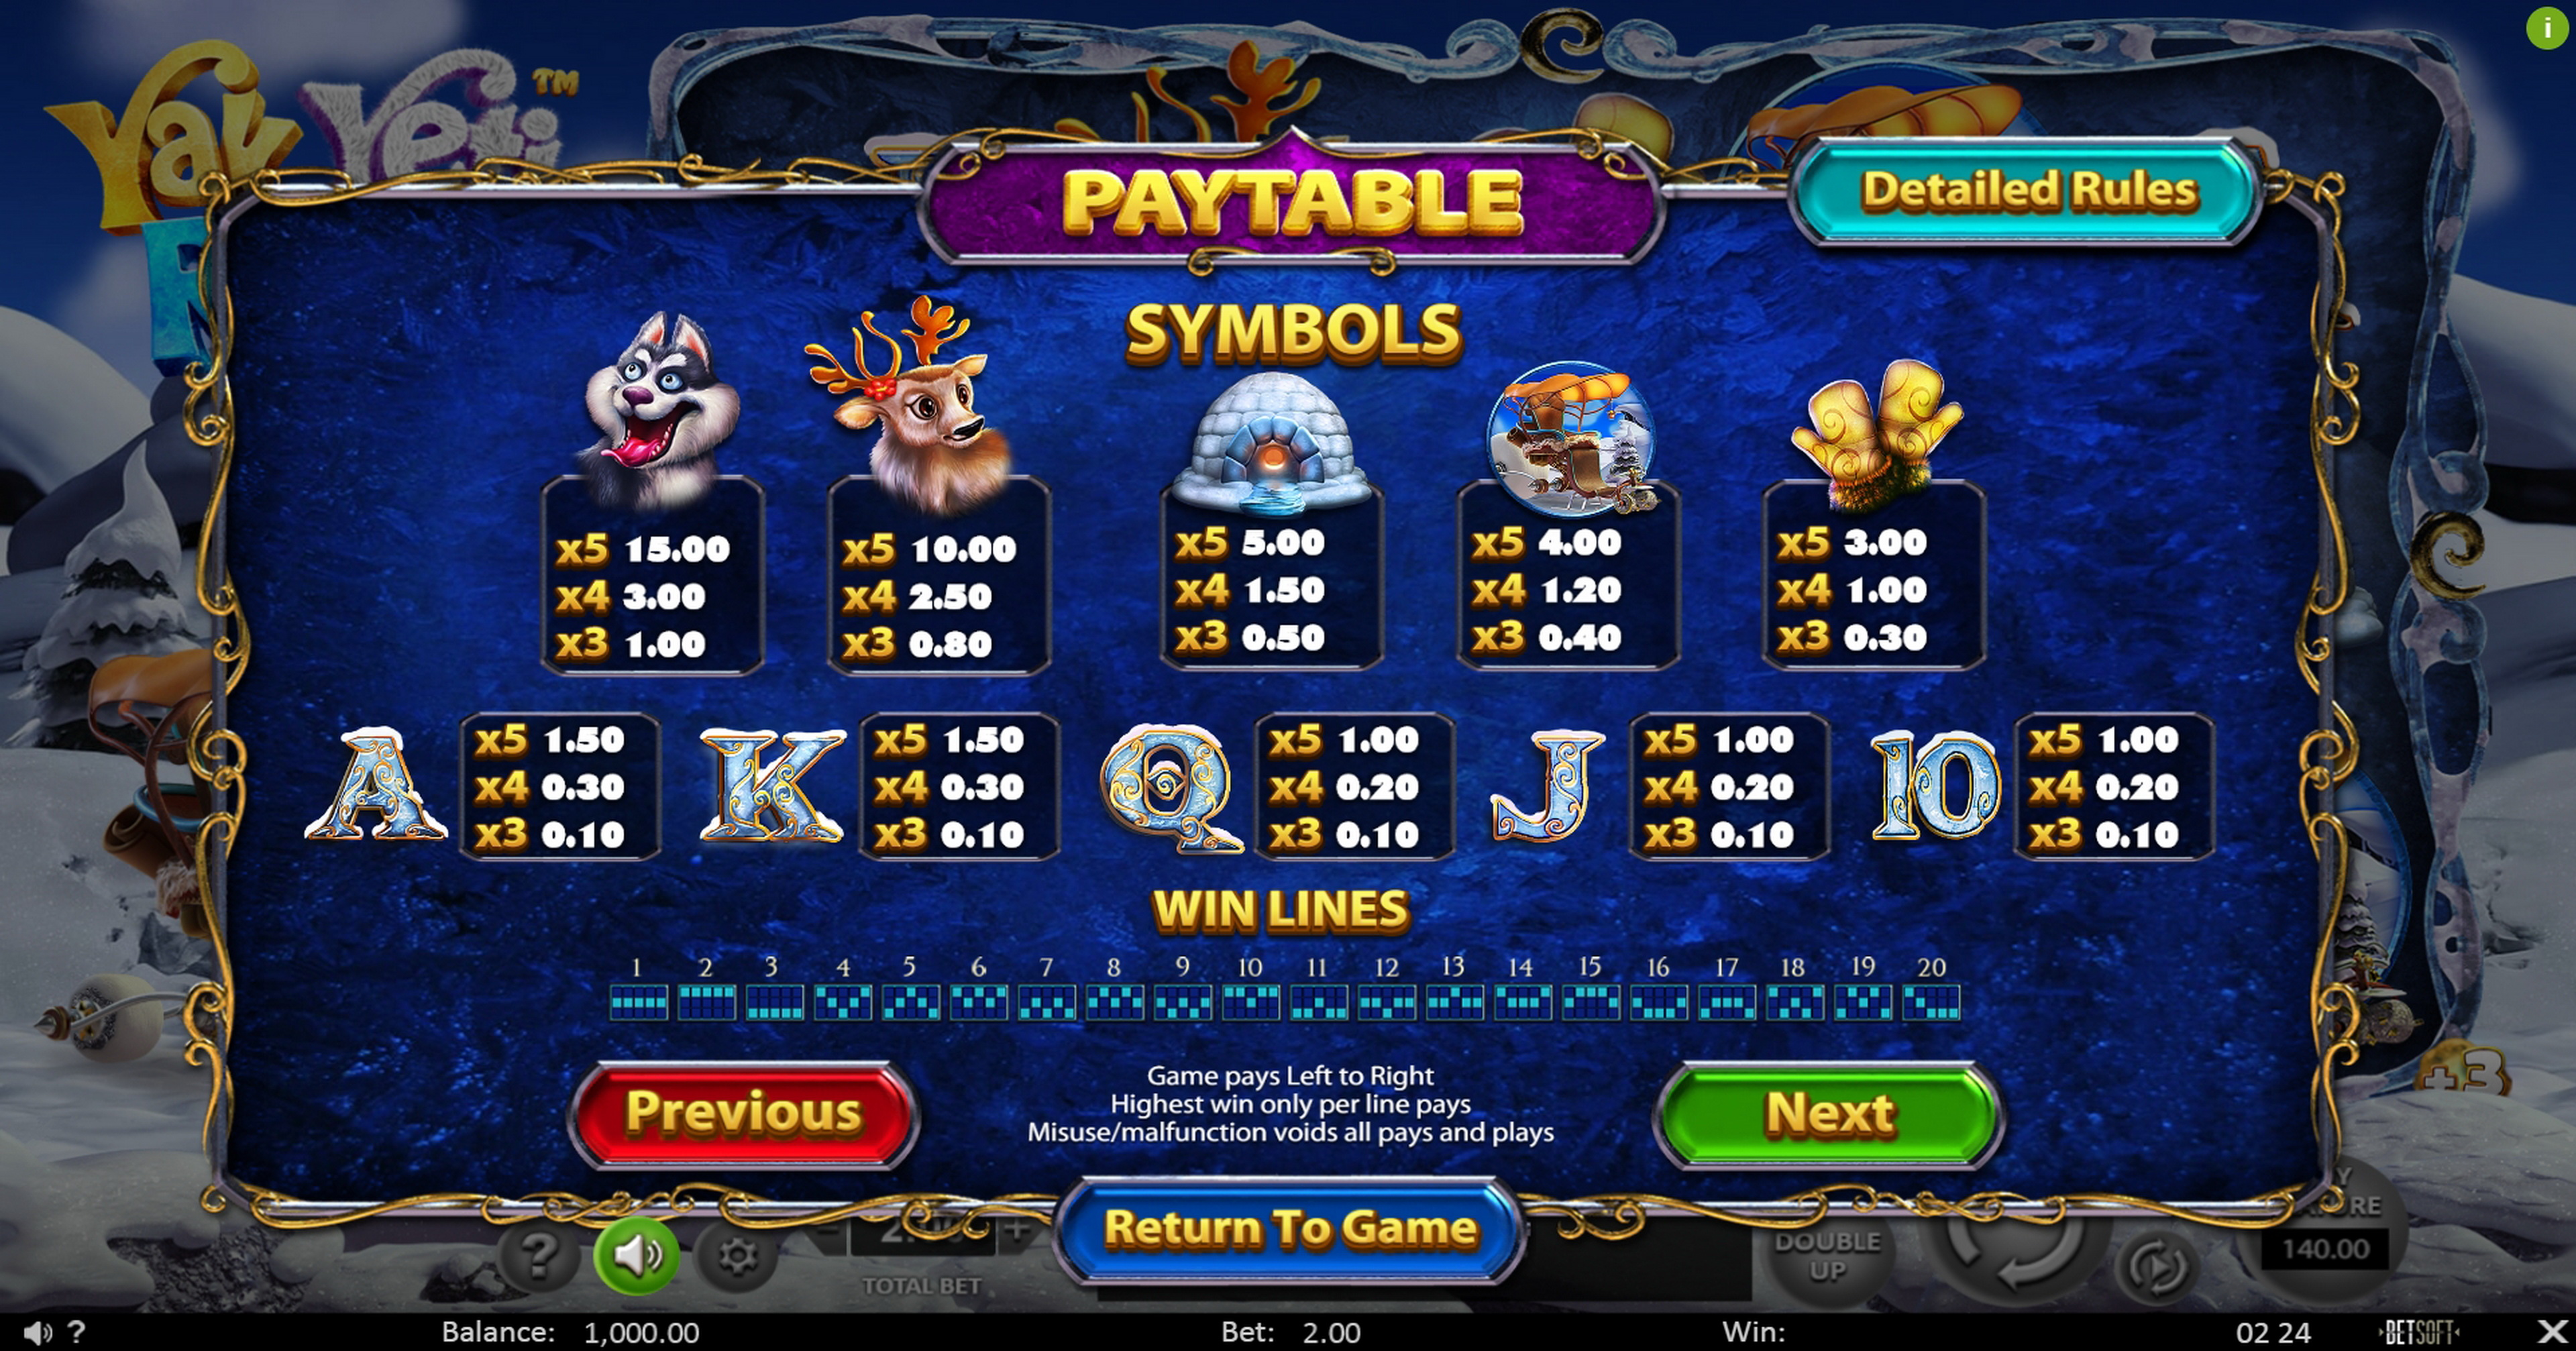 Info of Yak Yeti and Roll Slot Game by Betsoft